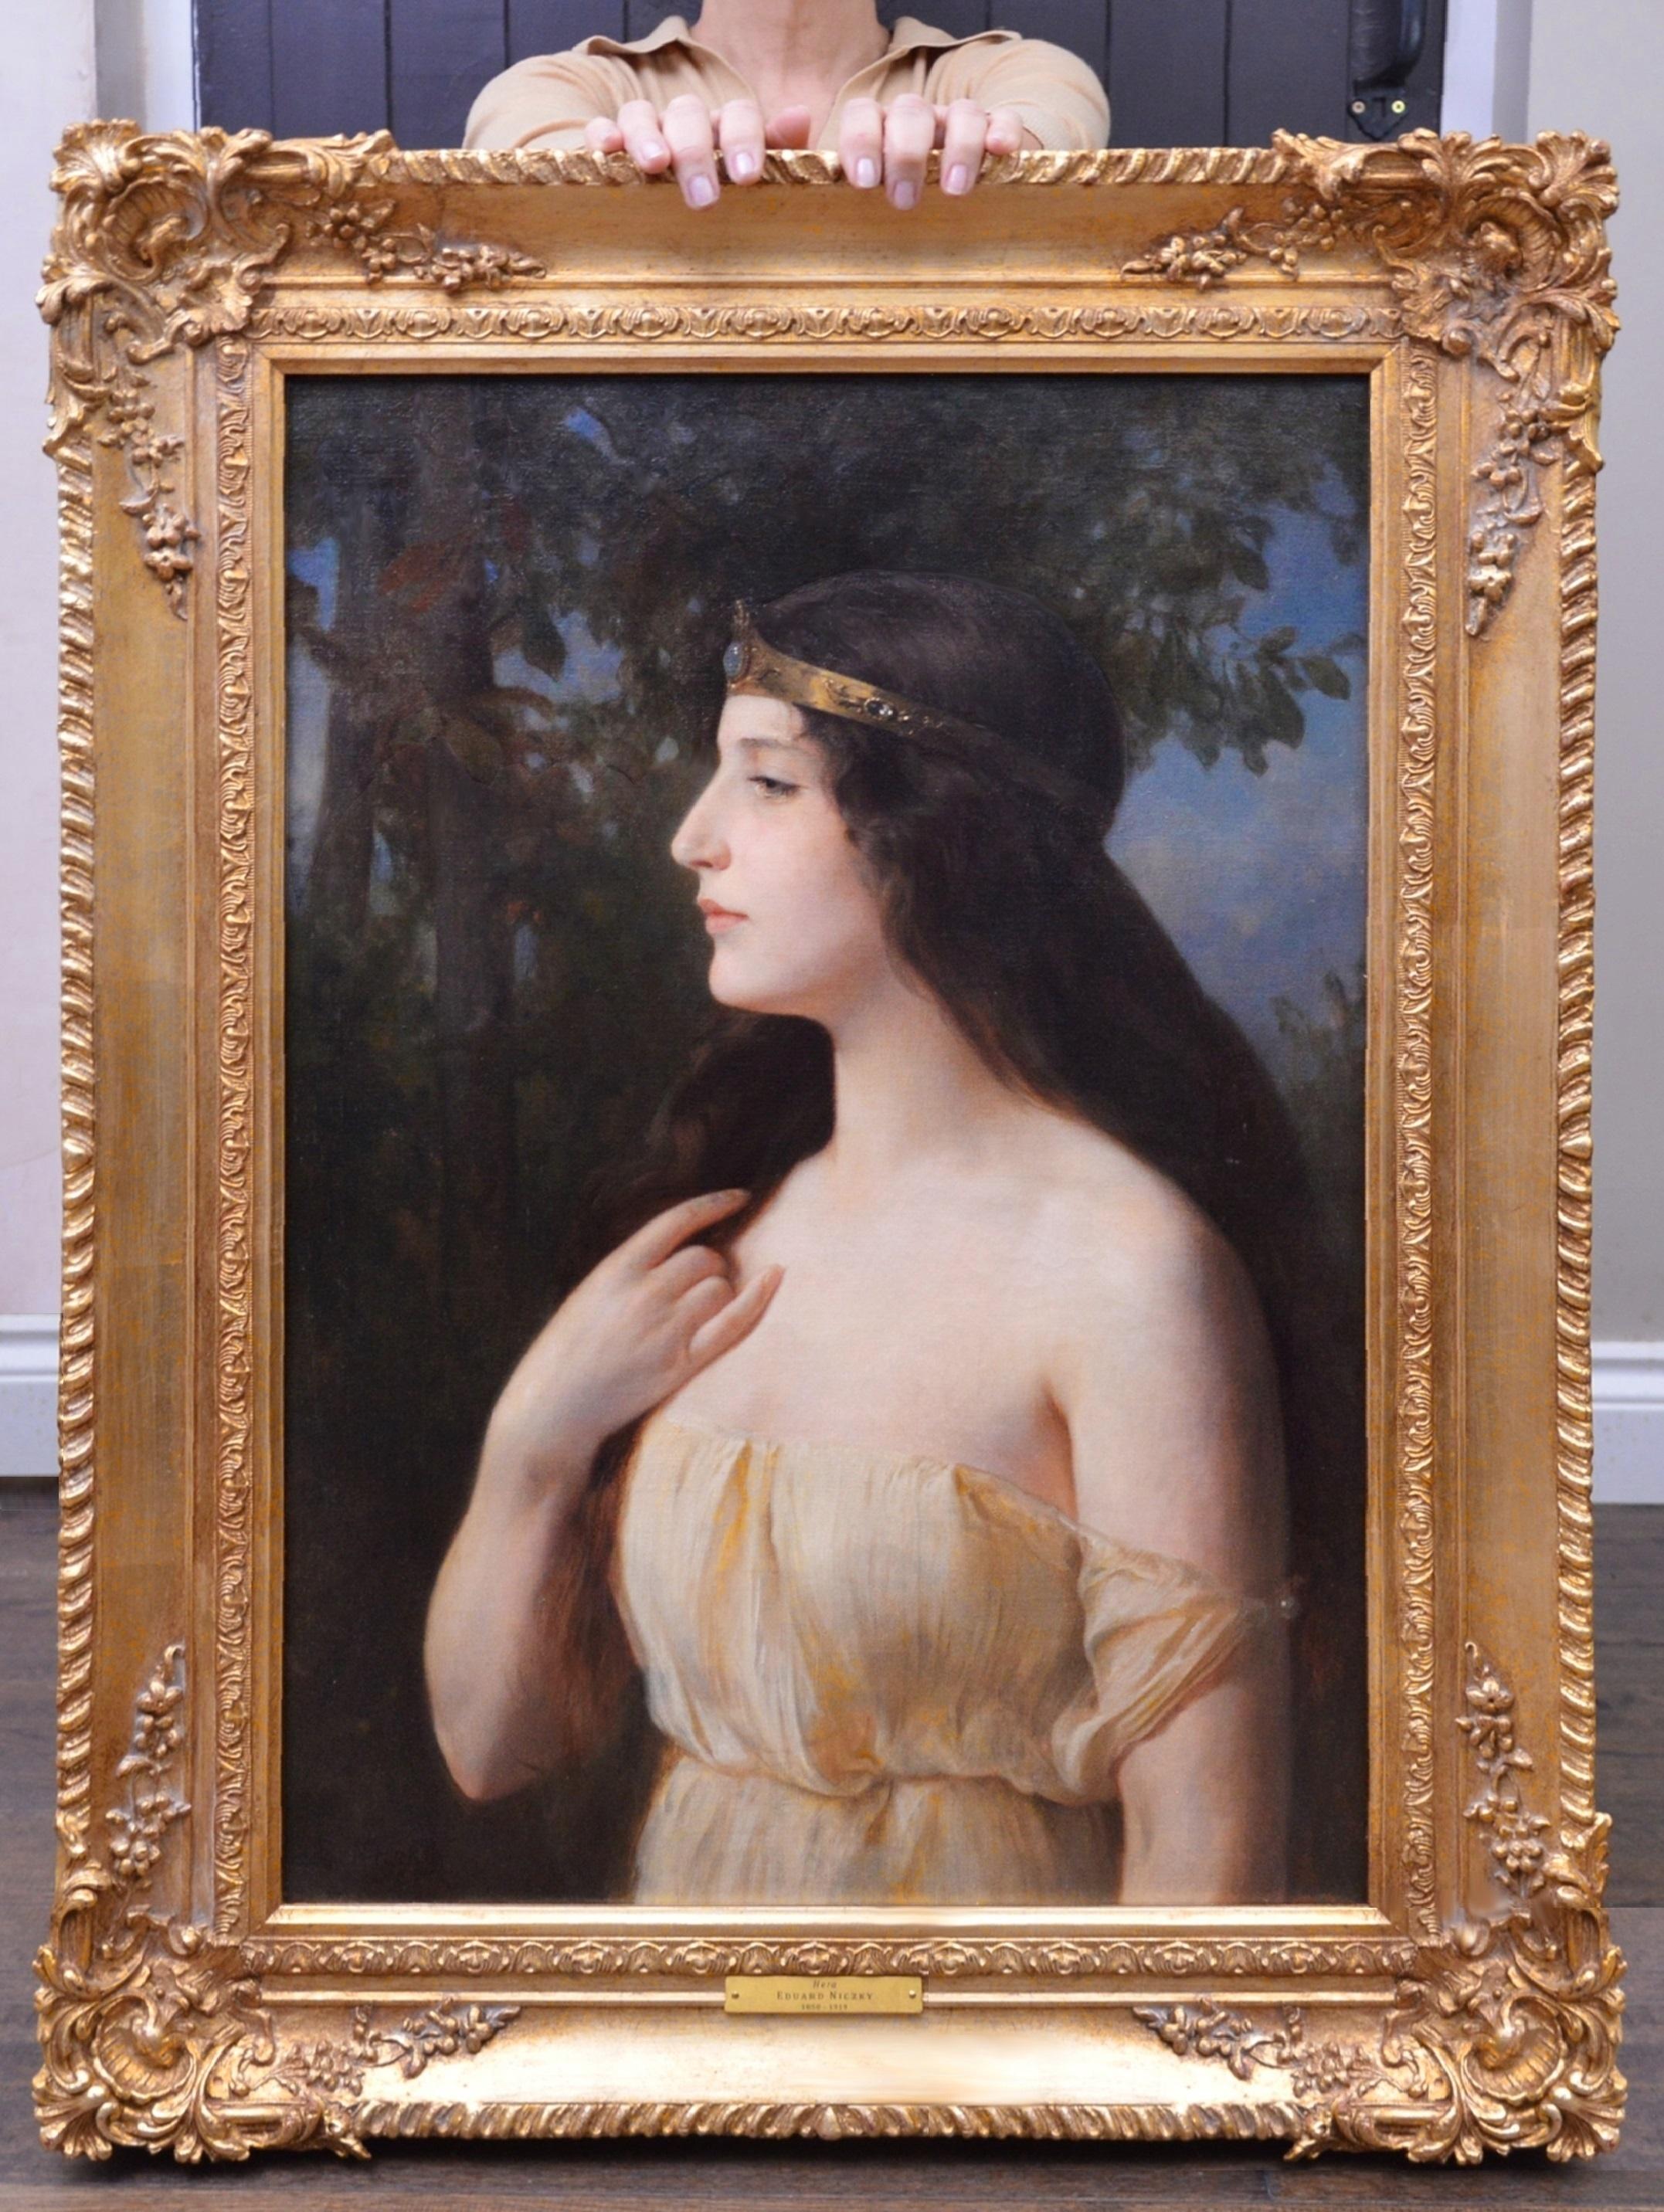 Eduard Niczky Figurative Painting - The Goddess Hera - 19th Century Neoclassical Oil Painting Ancient Greek Myth